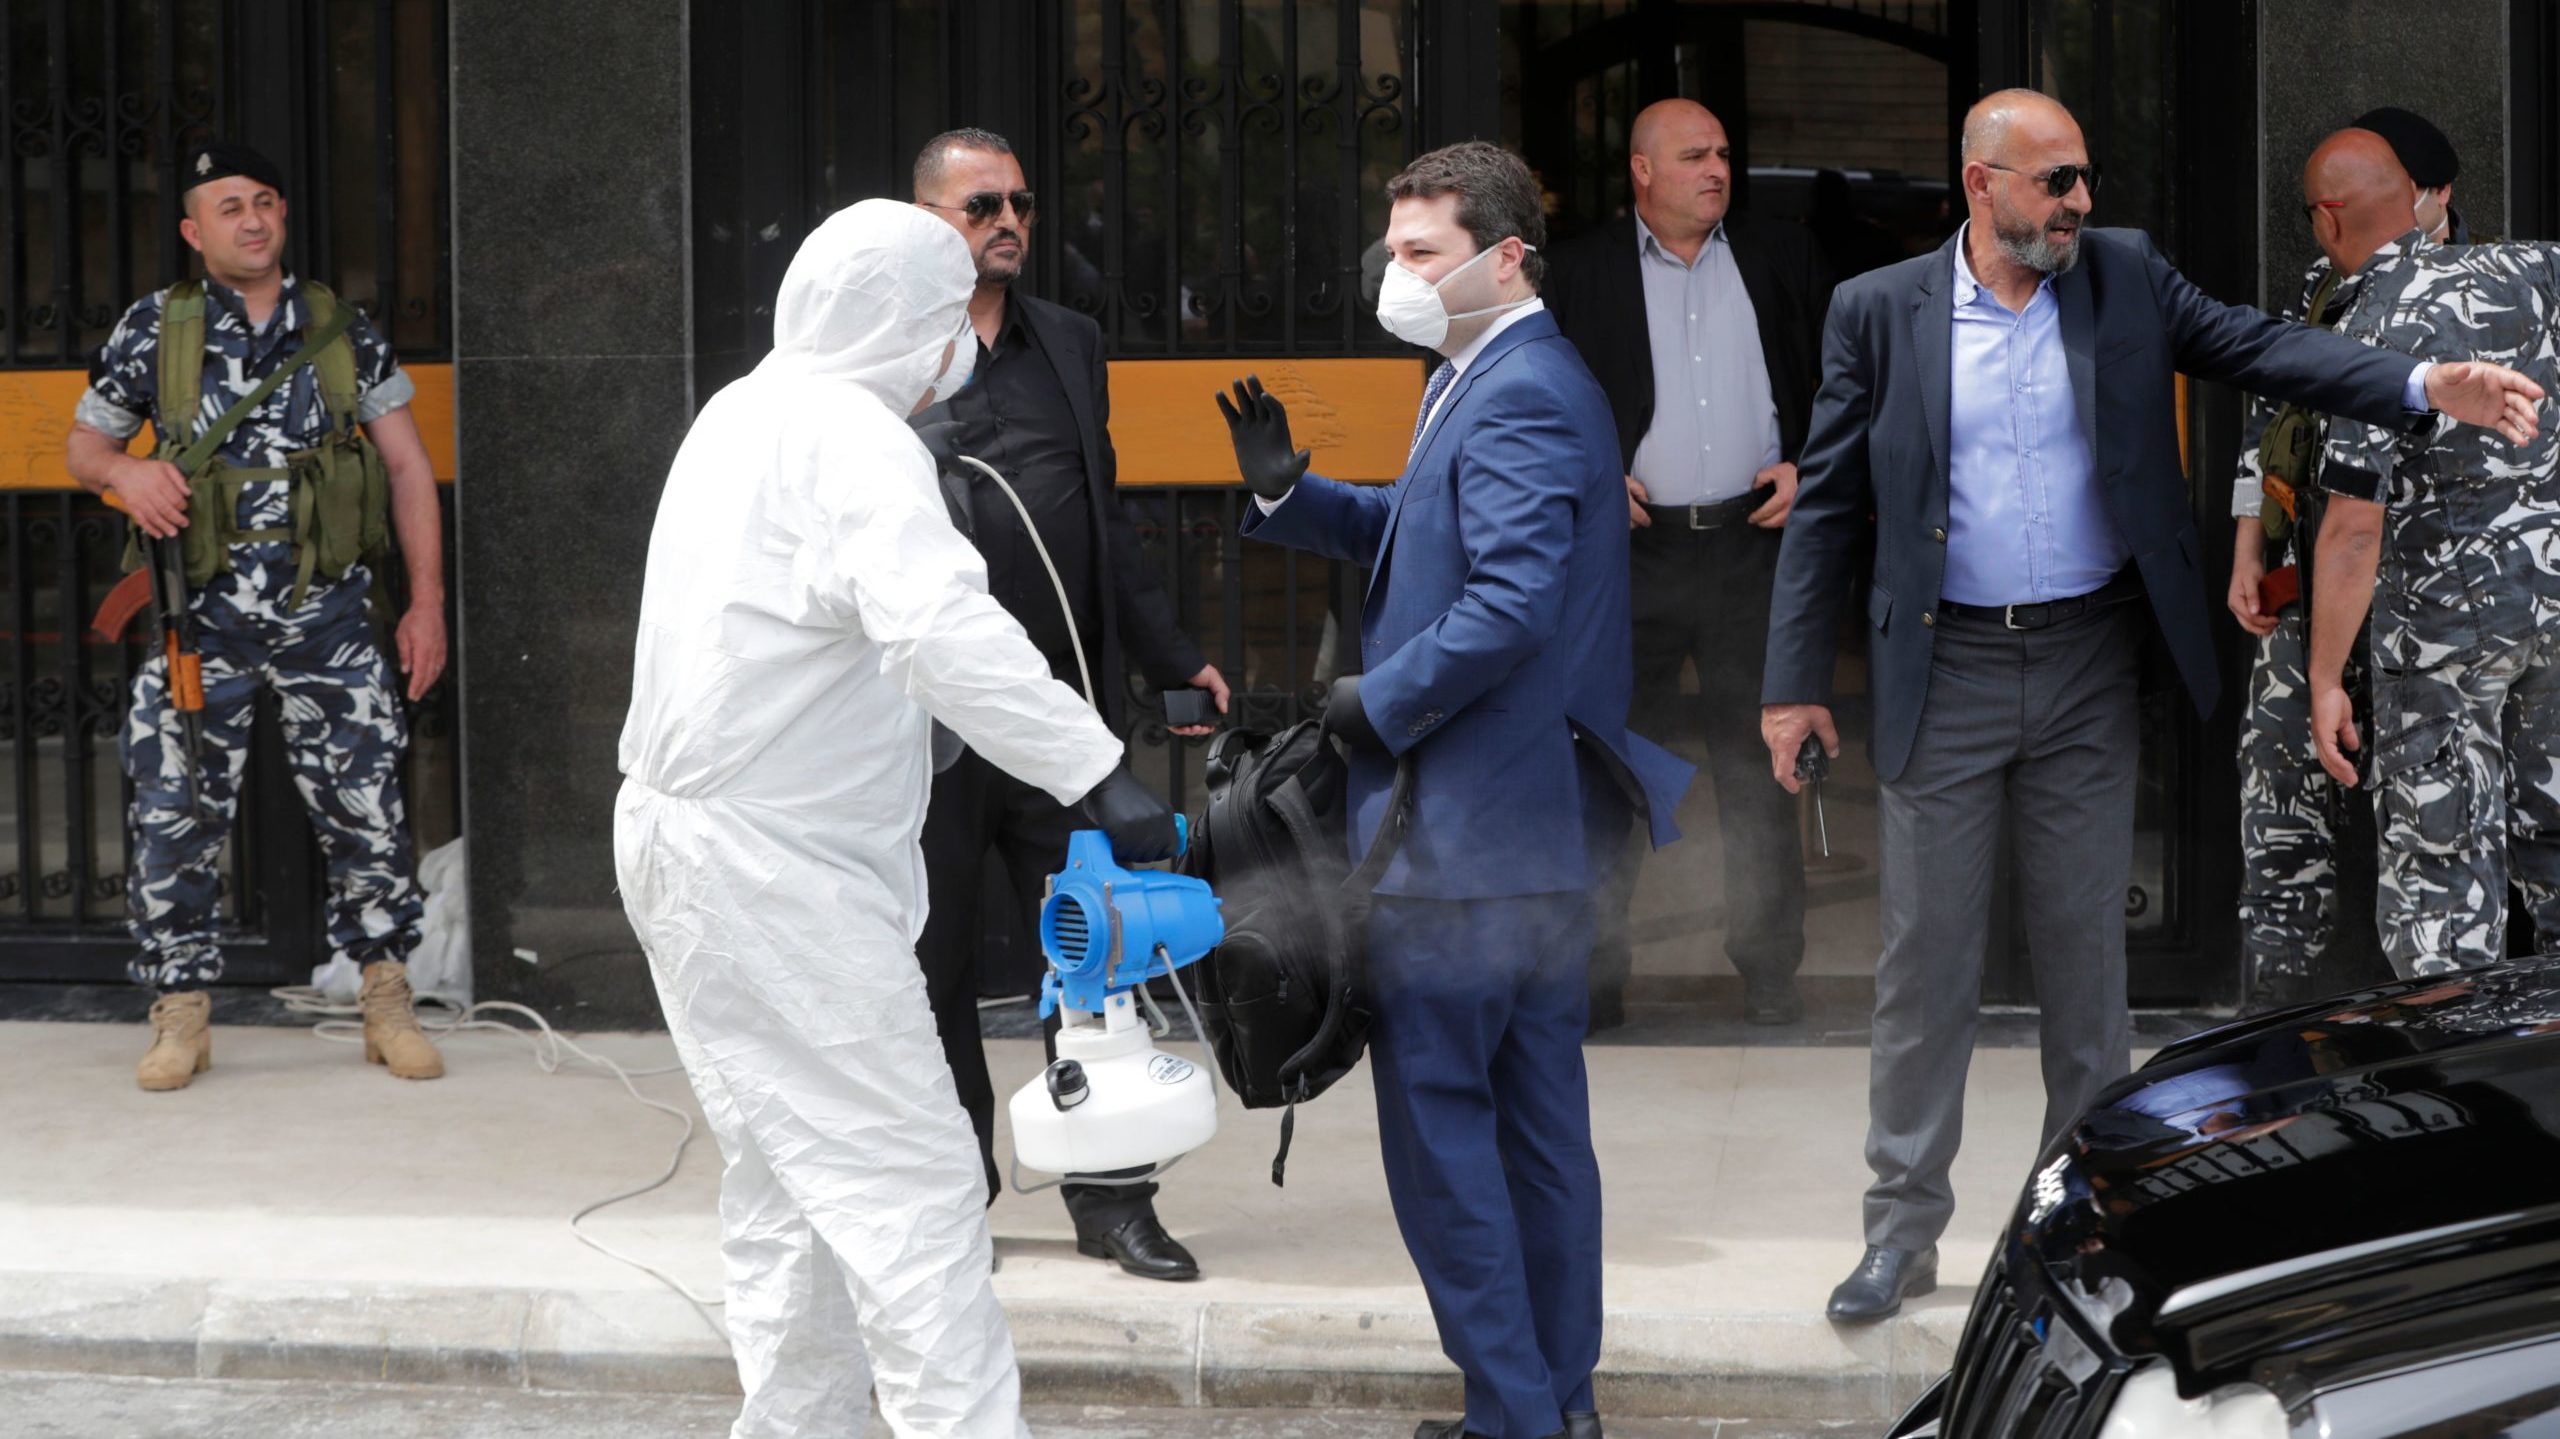 Lebanese MPs Sprayed with Disinfectant for Special Parliamentary Session